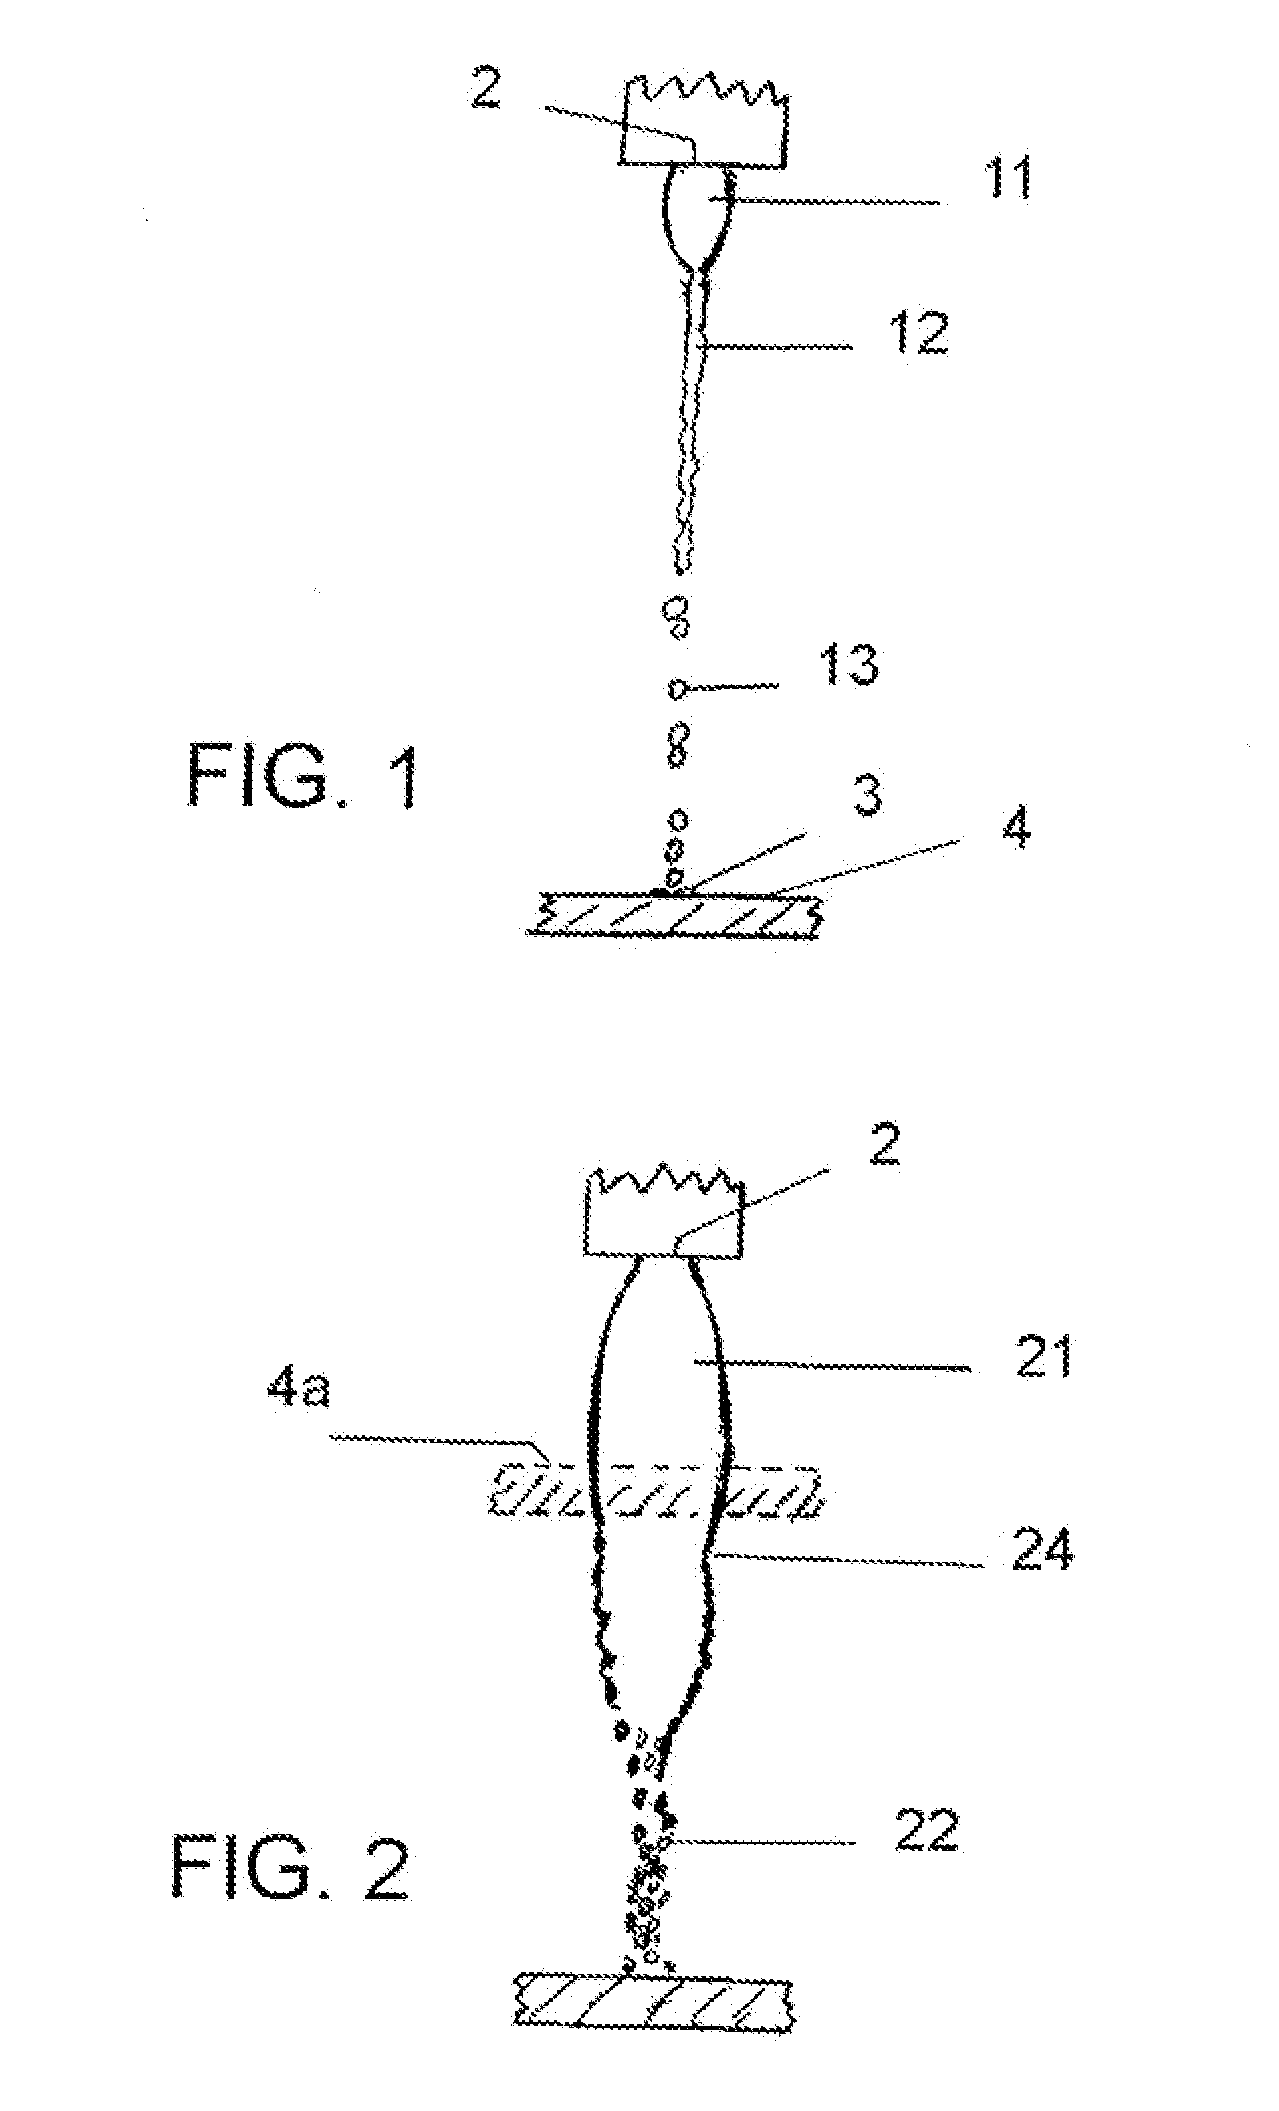 Airless spray-coating of a surface with an aqueous architectural coating composition